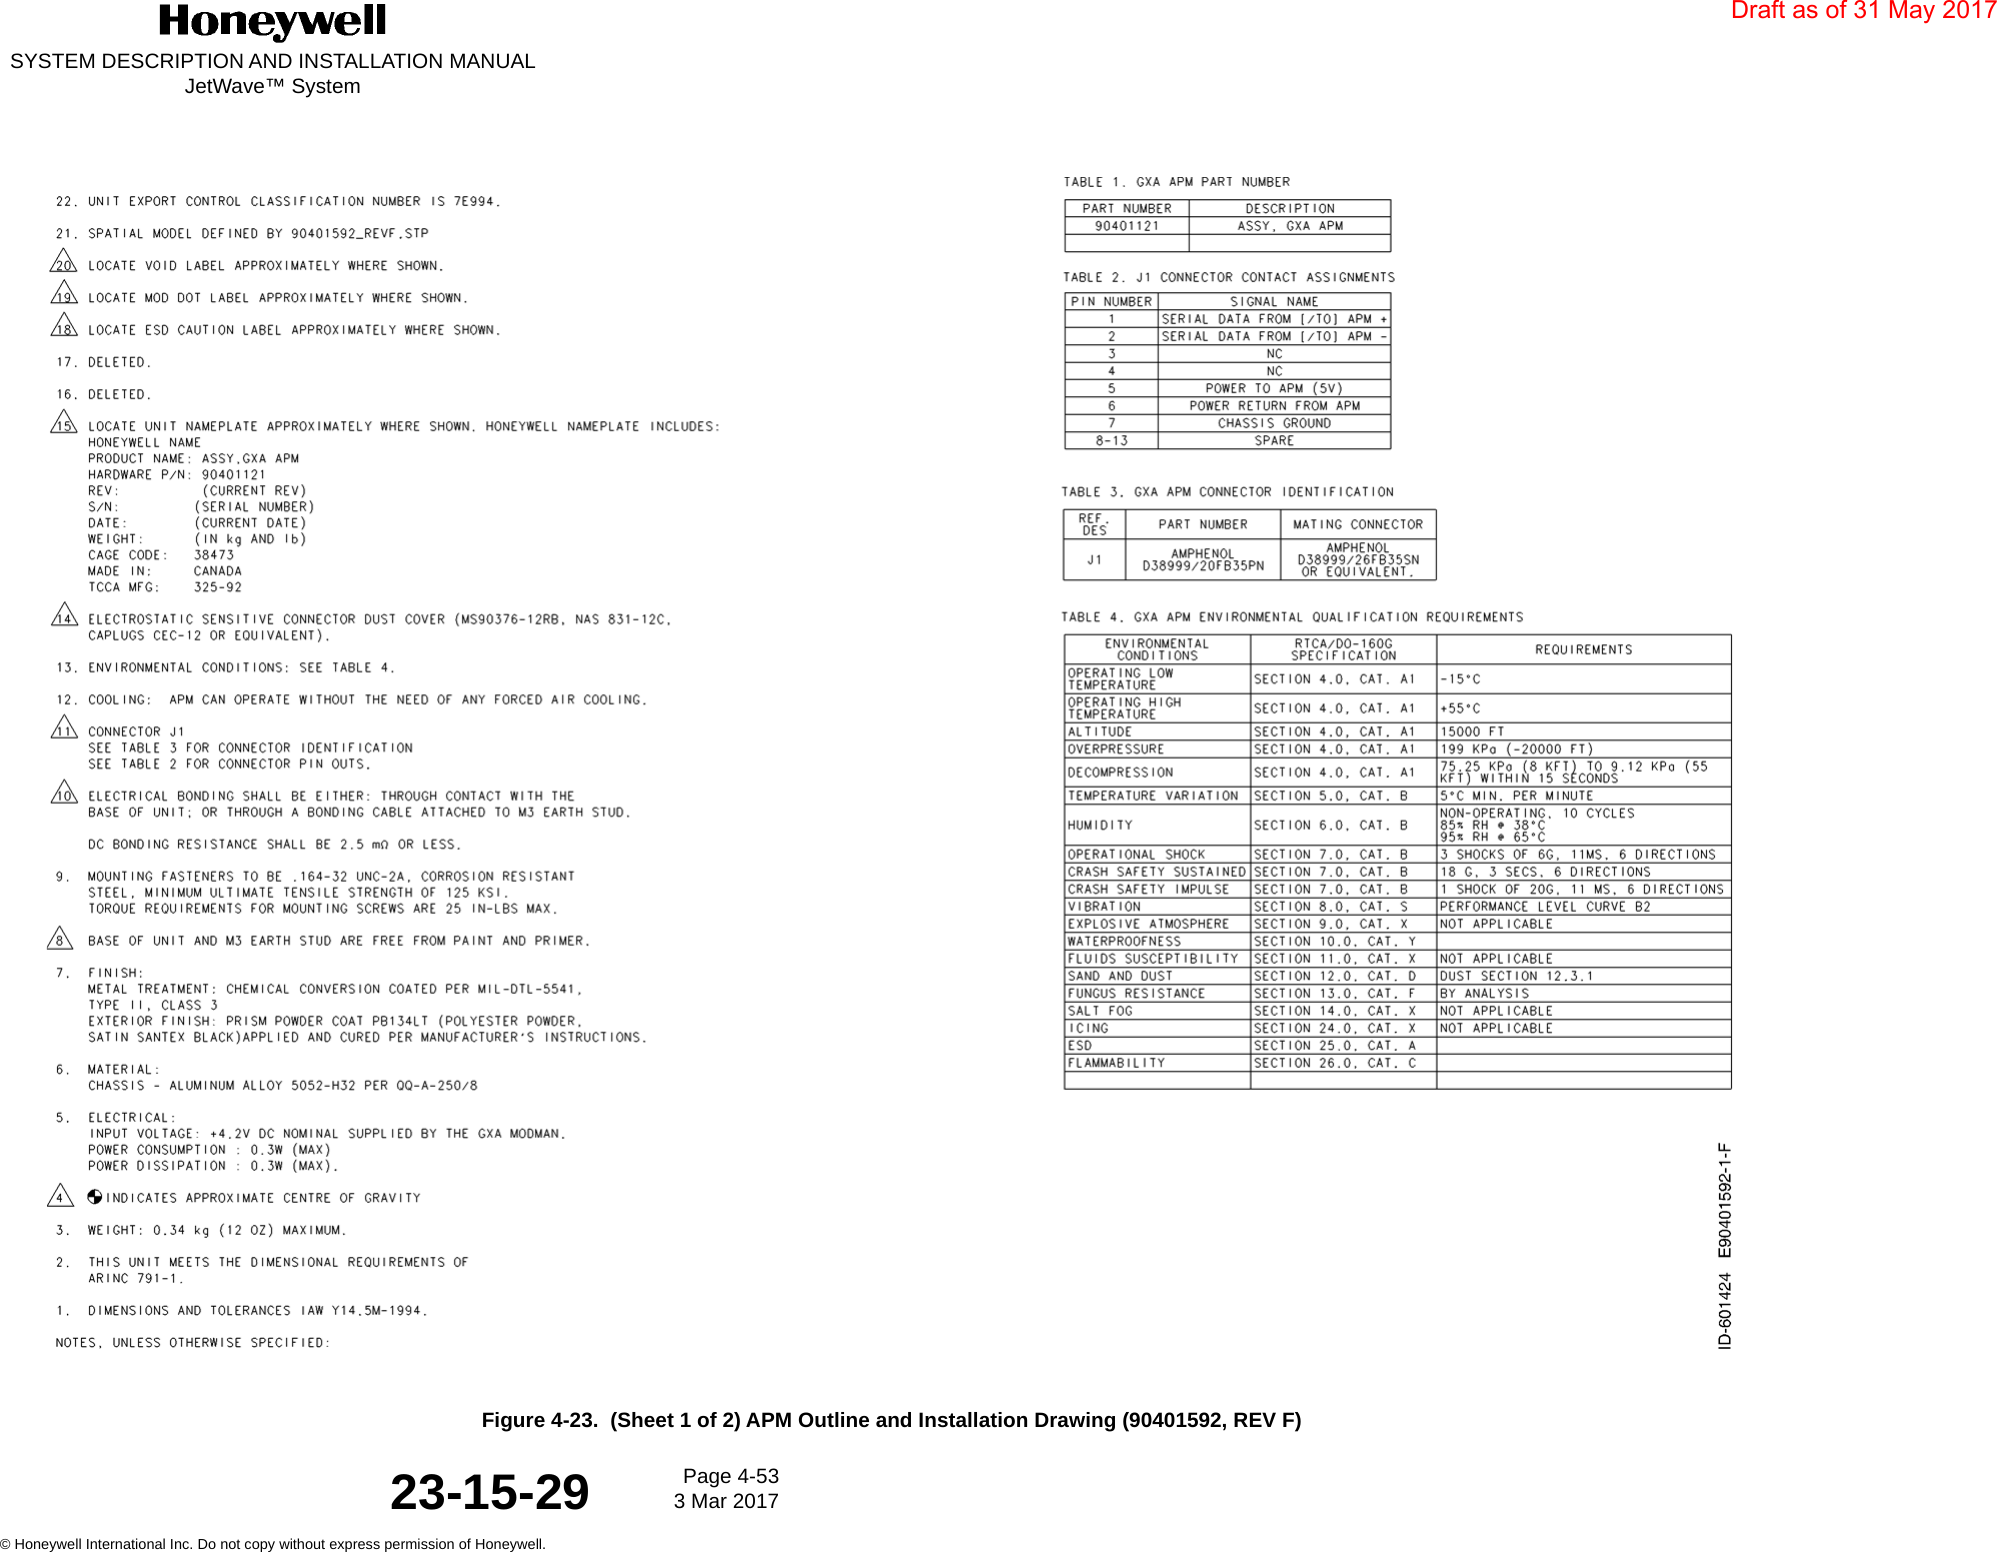 SYSTEM DESCRIPTION AND INSTALLATION MANUALJetWave™ SystemPage 4-53 3 Mar 2017© Honeywell International Inc. Do not copy without express permission of Honeywell.23-15-29Figure 4-23.  (Sheet 1 of 2) APM Outline and Installation Drawing (90401592, REV F)Draft as of 31 May 2017